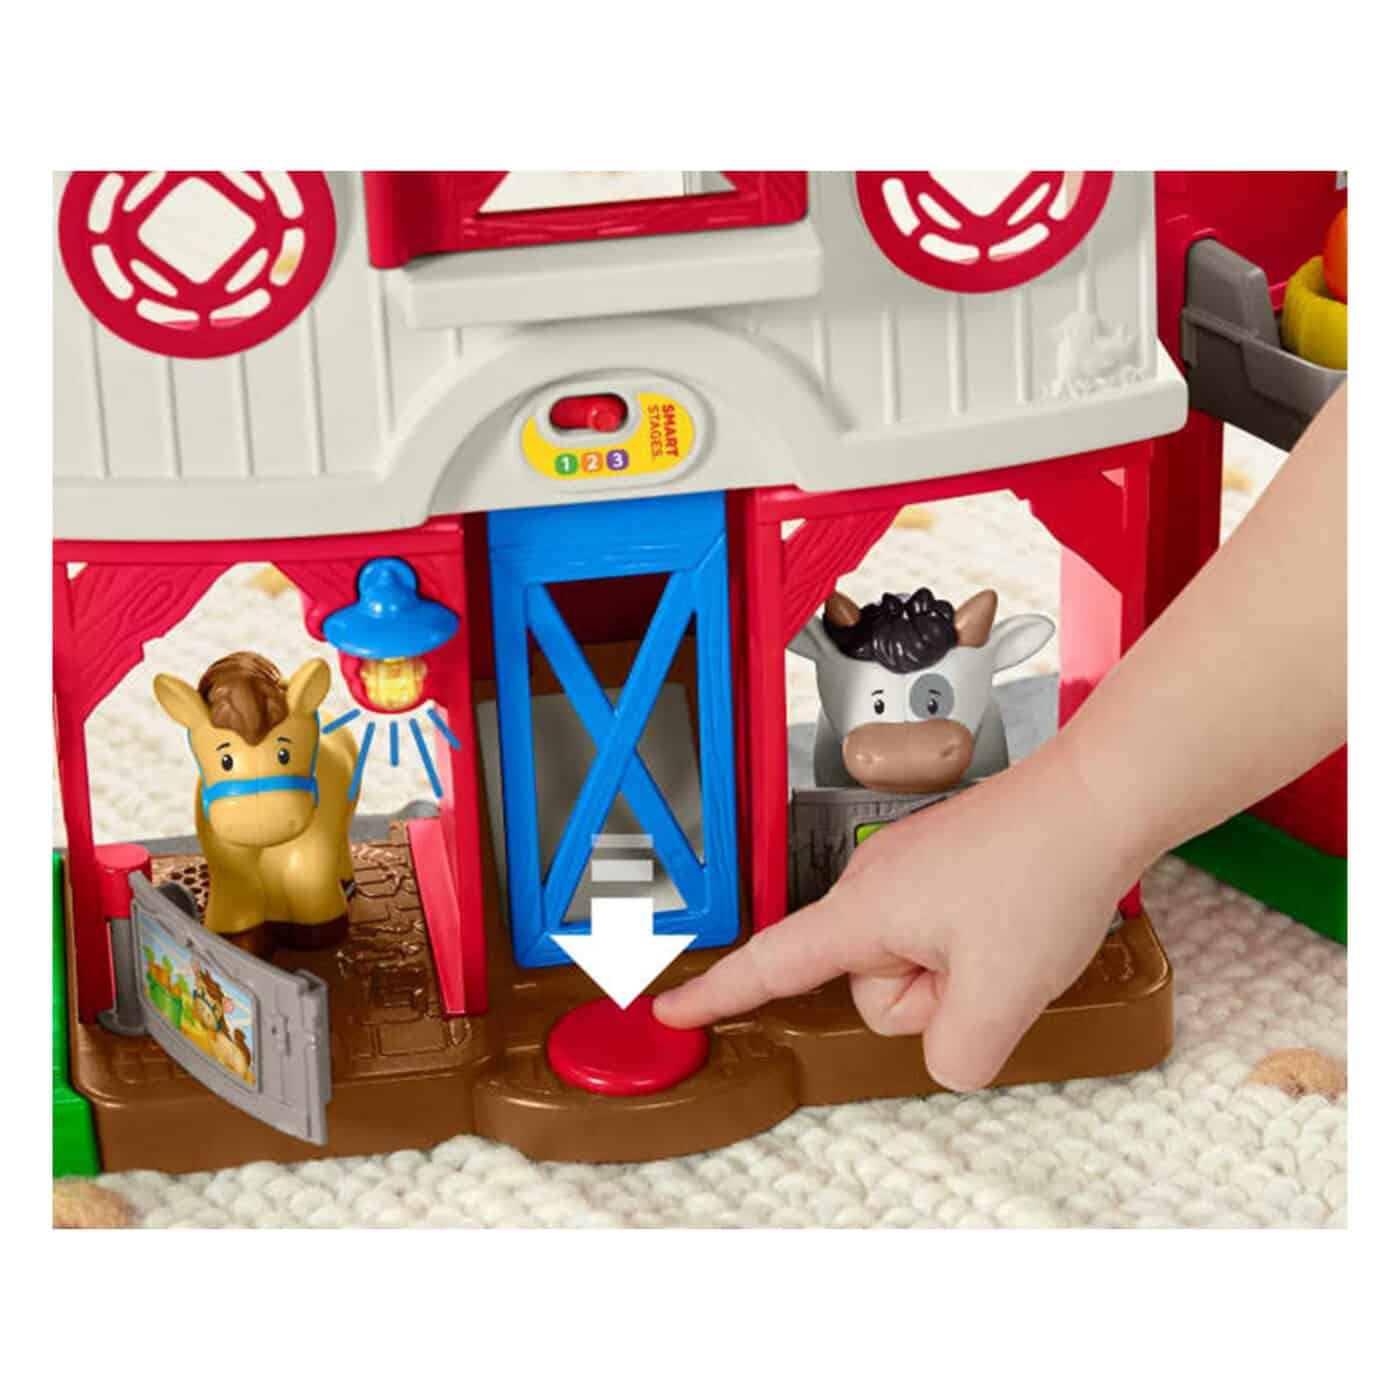 Fisher Price - Little People - Caring For Animals Farm Playset